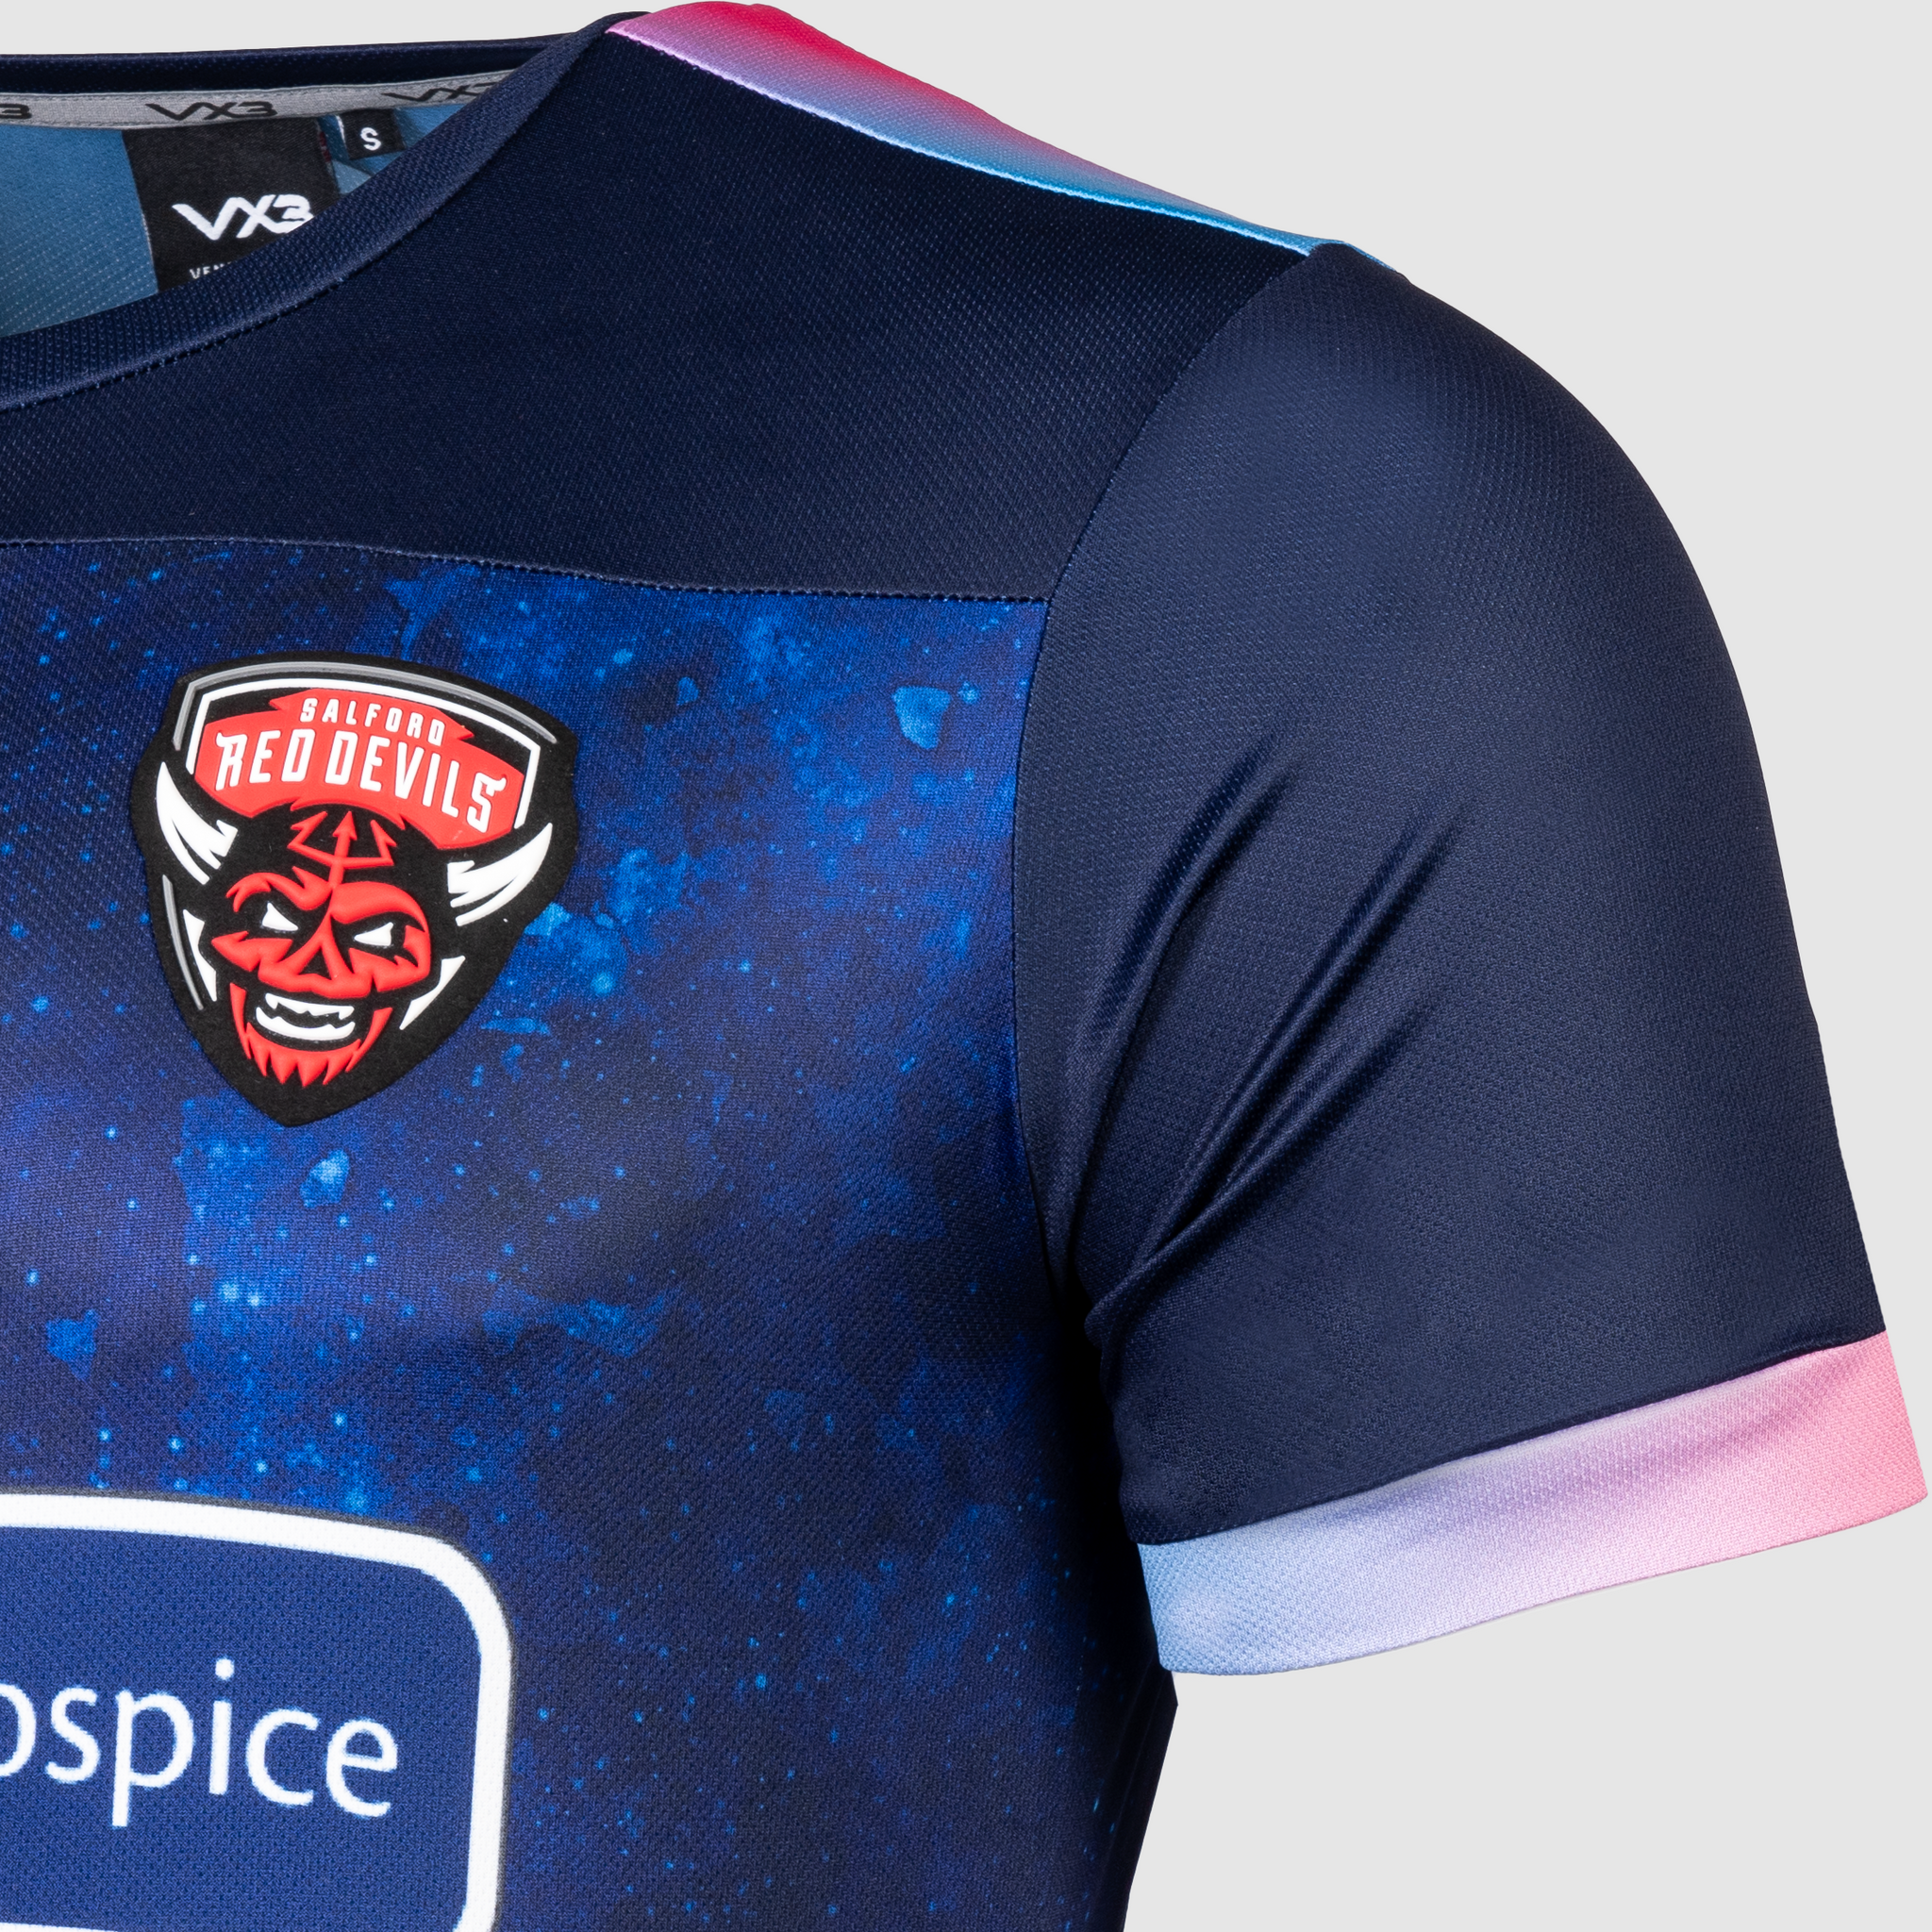 Salford Red Devils 2023 St Ann's Hospice Tee Youth